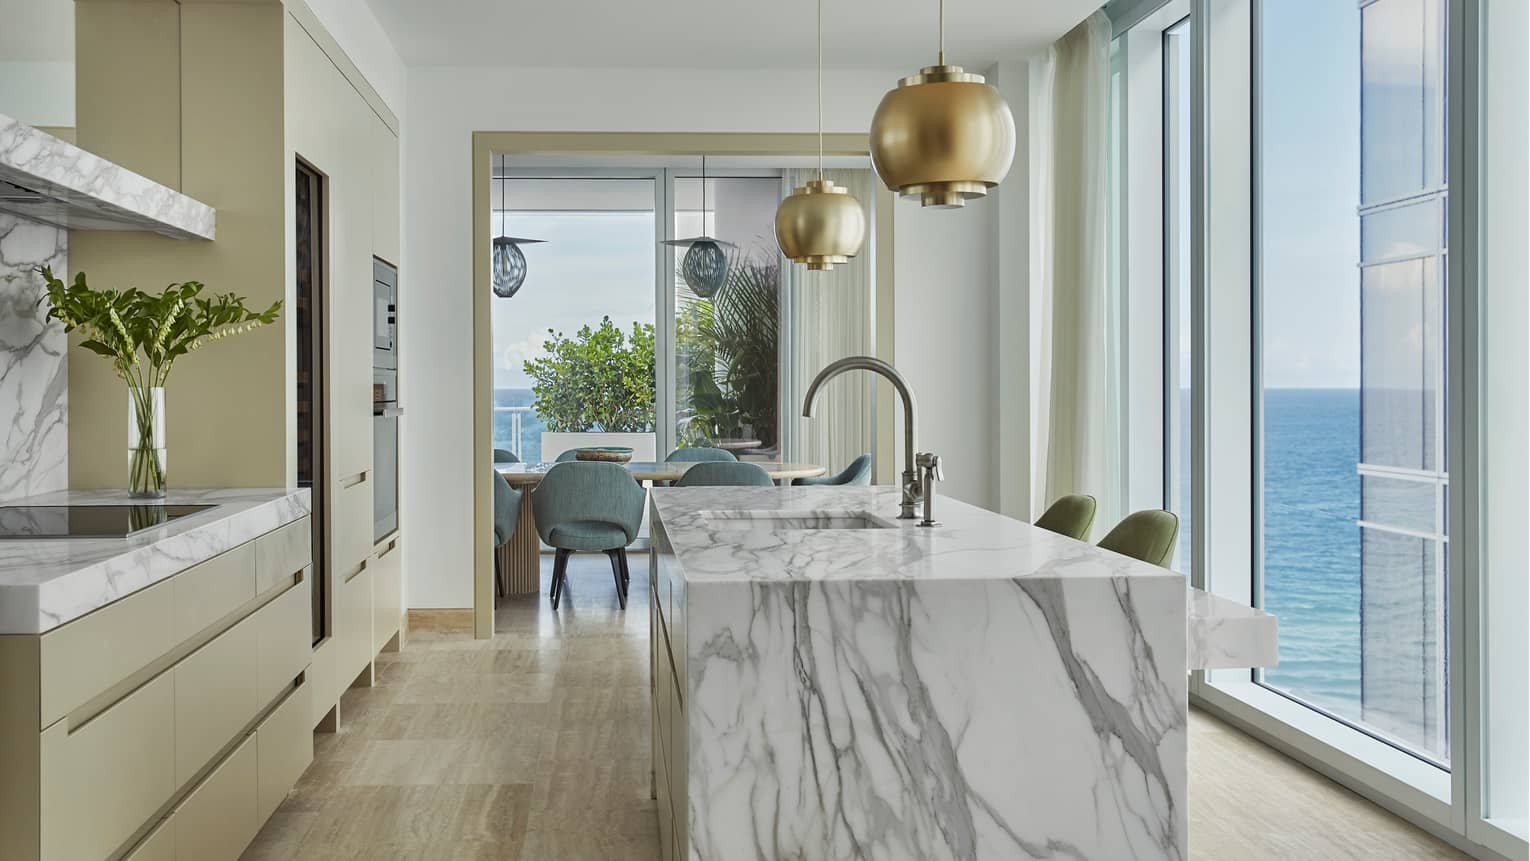 Retro-style brass lamps above grey marble kitchen island, glass wall with ocean views